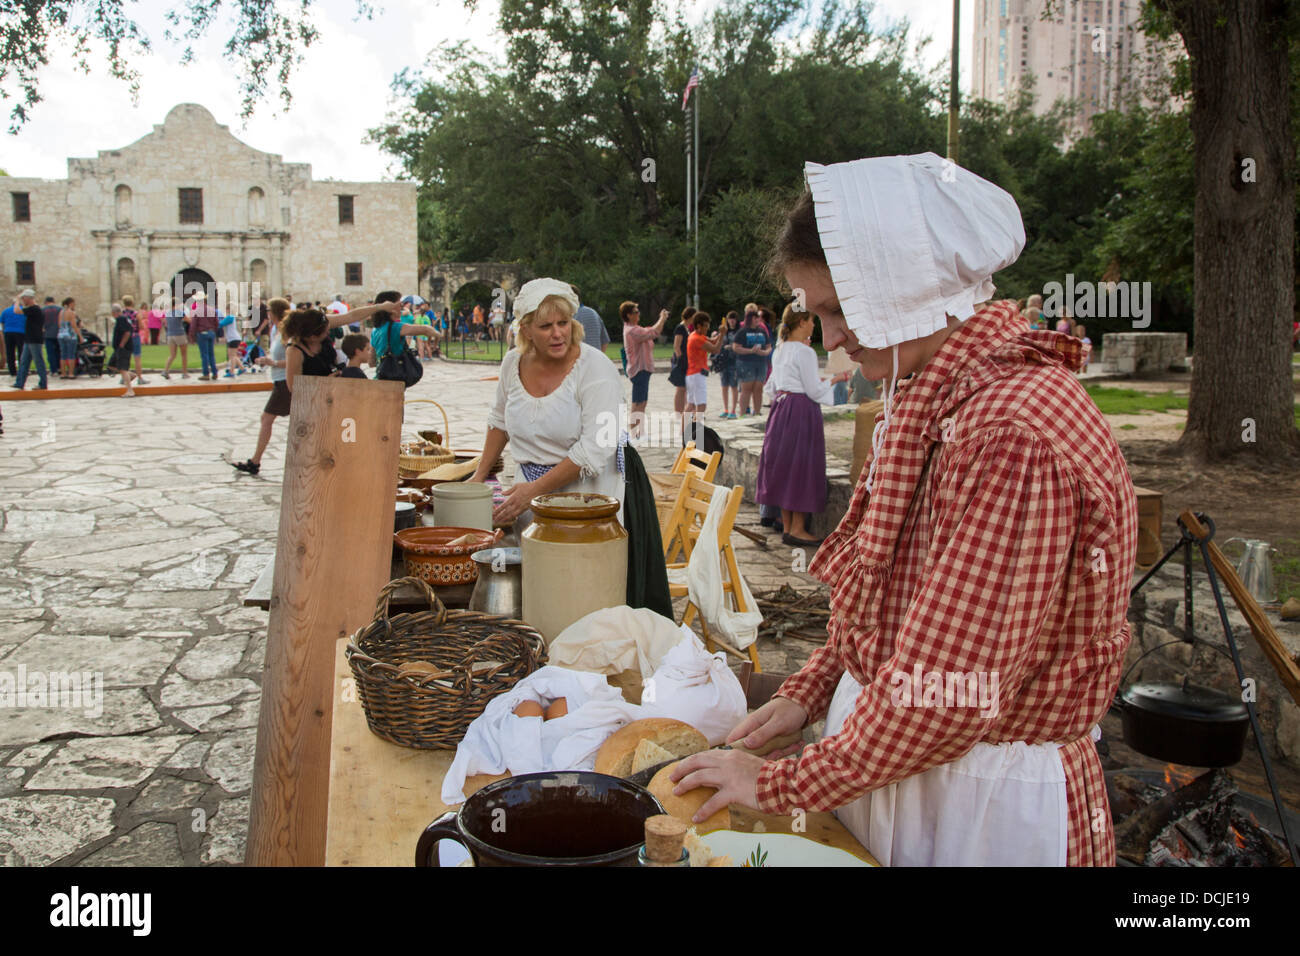 Members of the San Antonio Living History Association demonstrate life of the 1830s at the plaza in front of the Alamo. Stock Photo